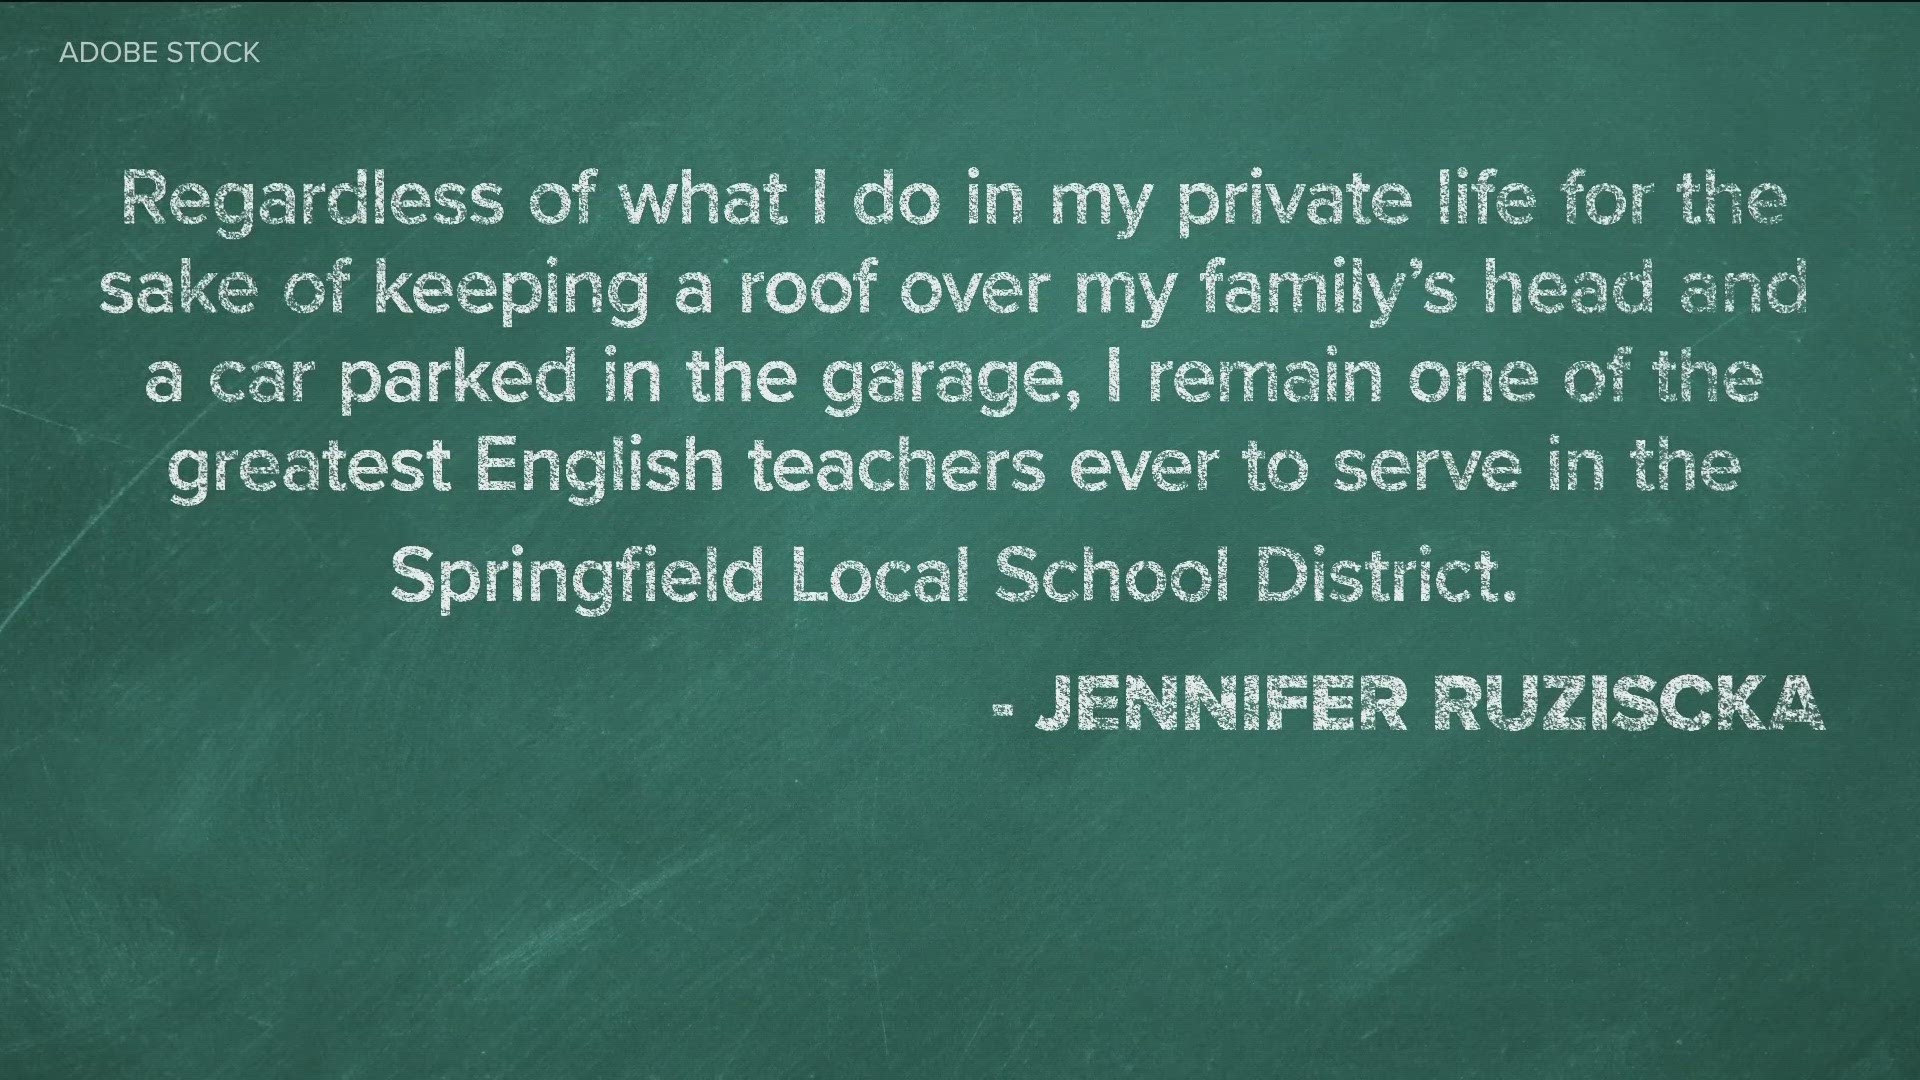 Jennifer Ruziscka's profiles on the sexually explicit sites were included in documents related to the investigation conducted by the school district.